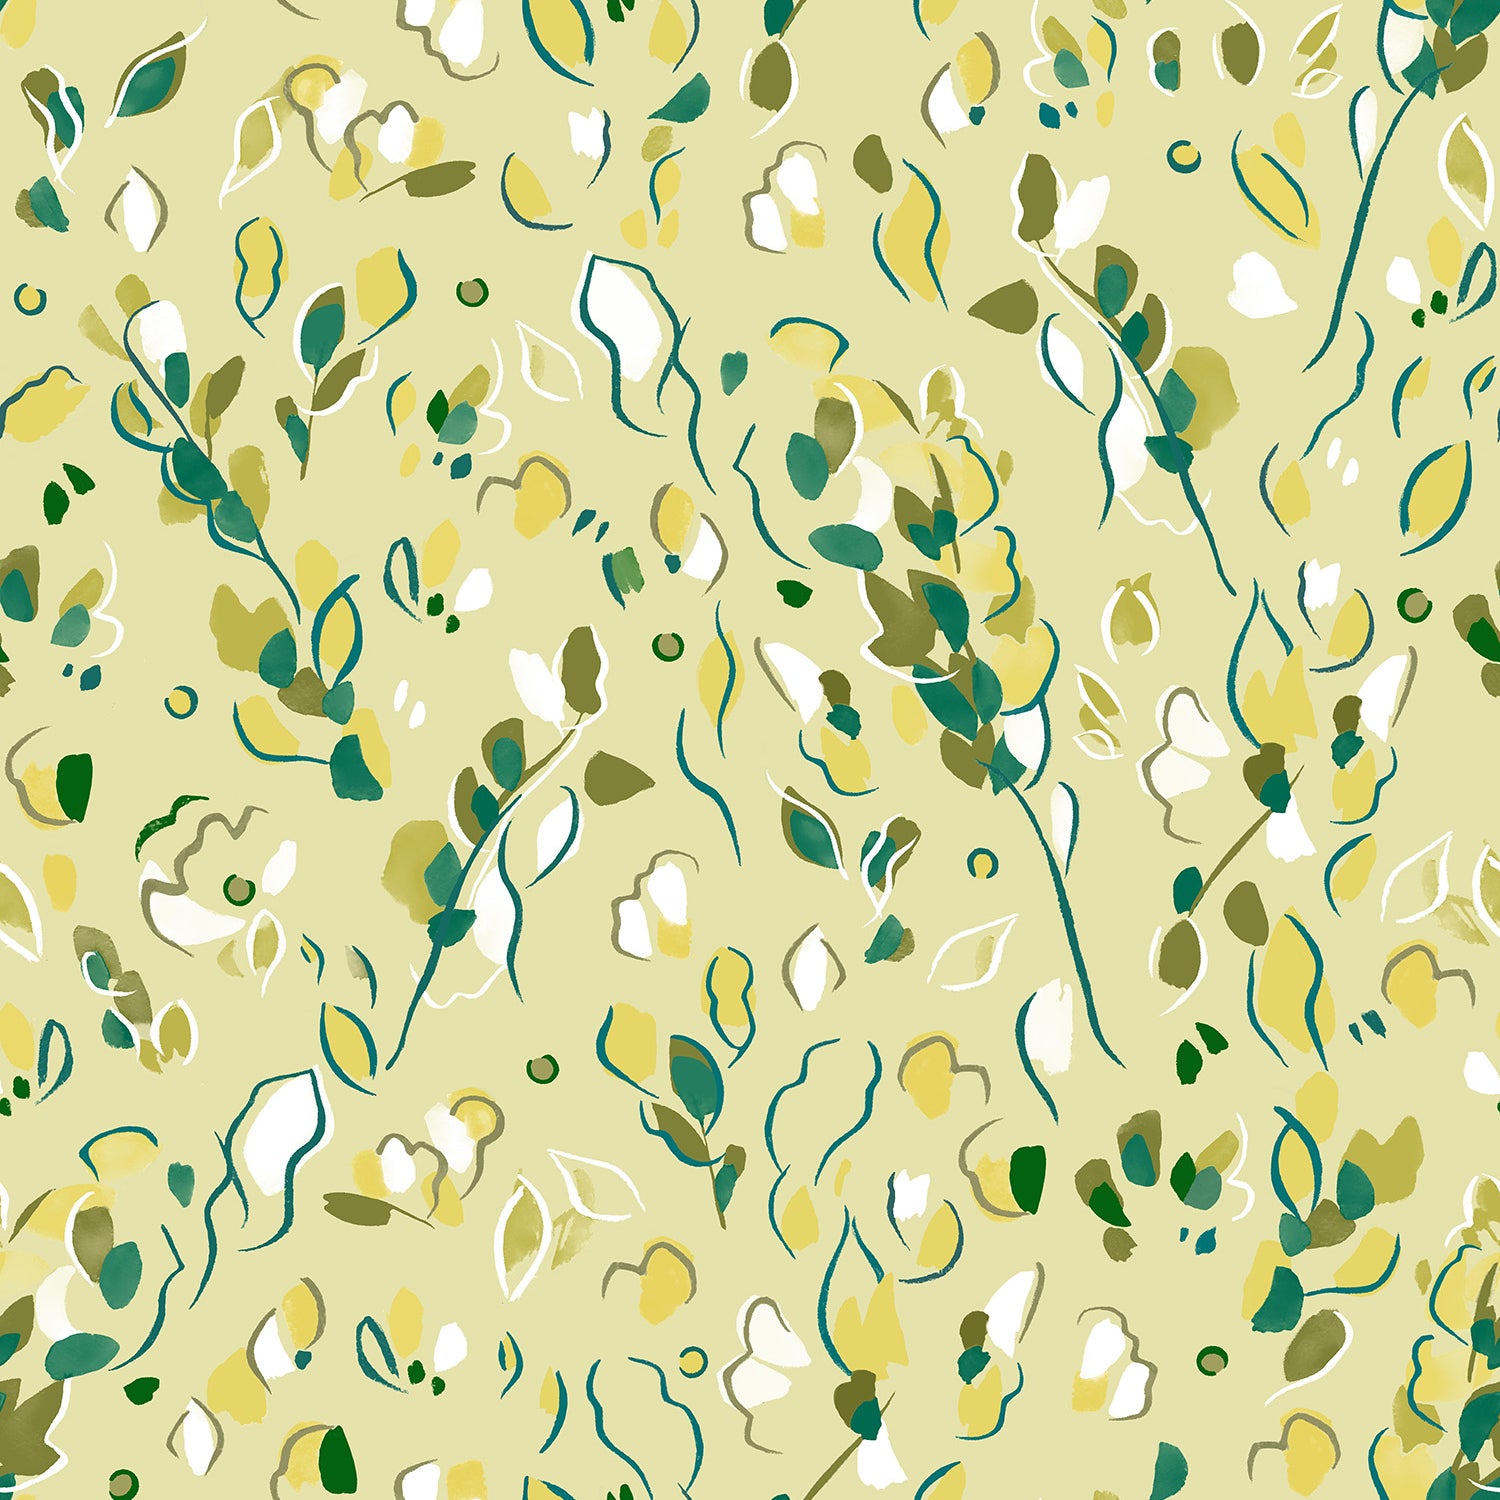 Detail of fabric in a painterly leaf print in shades of green and yellow on a light yellow field.